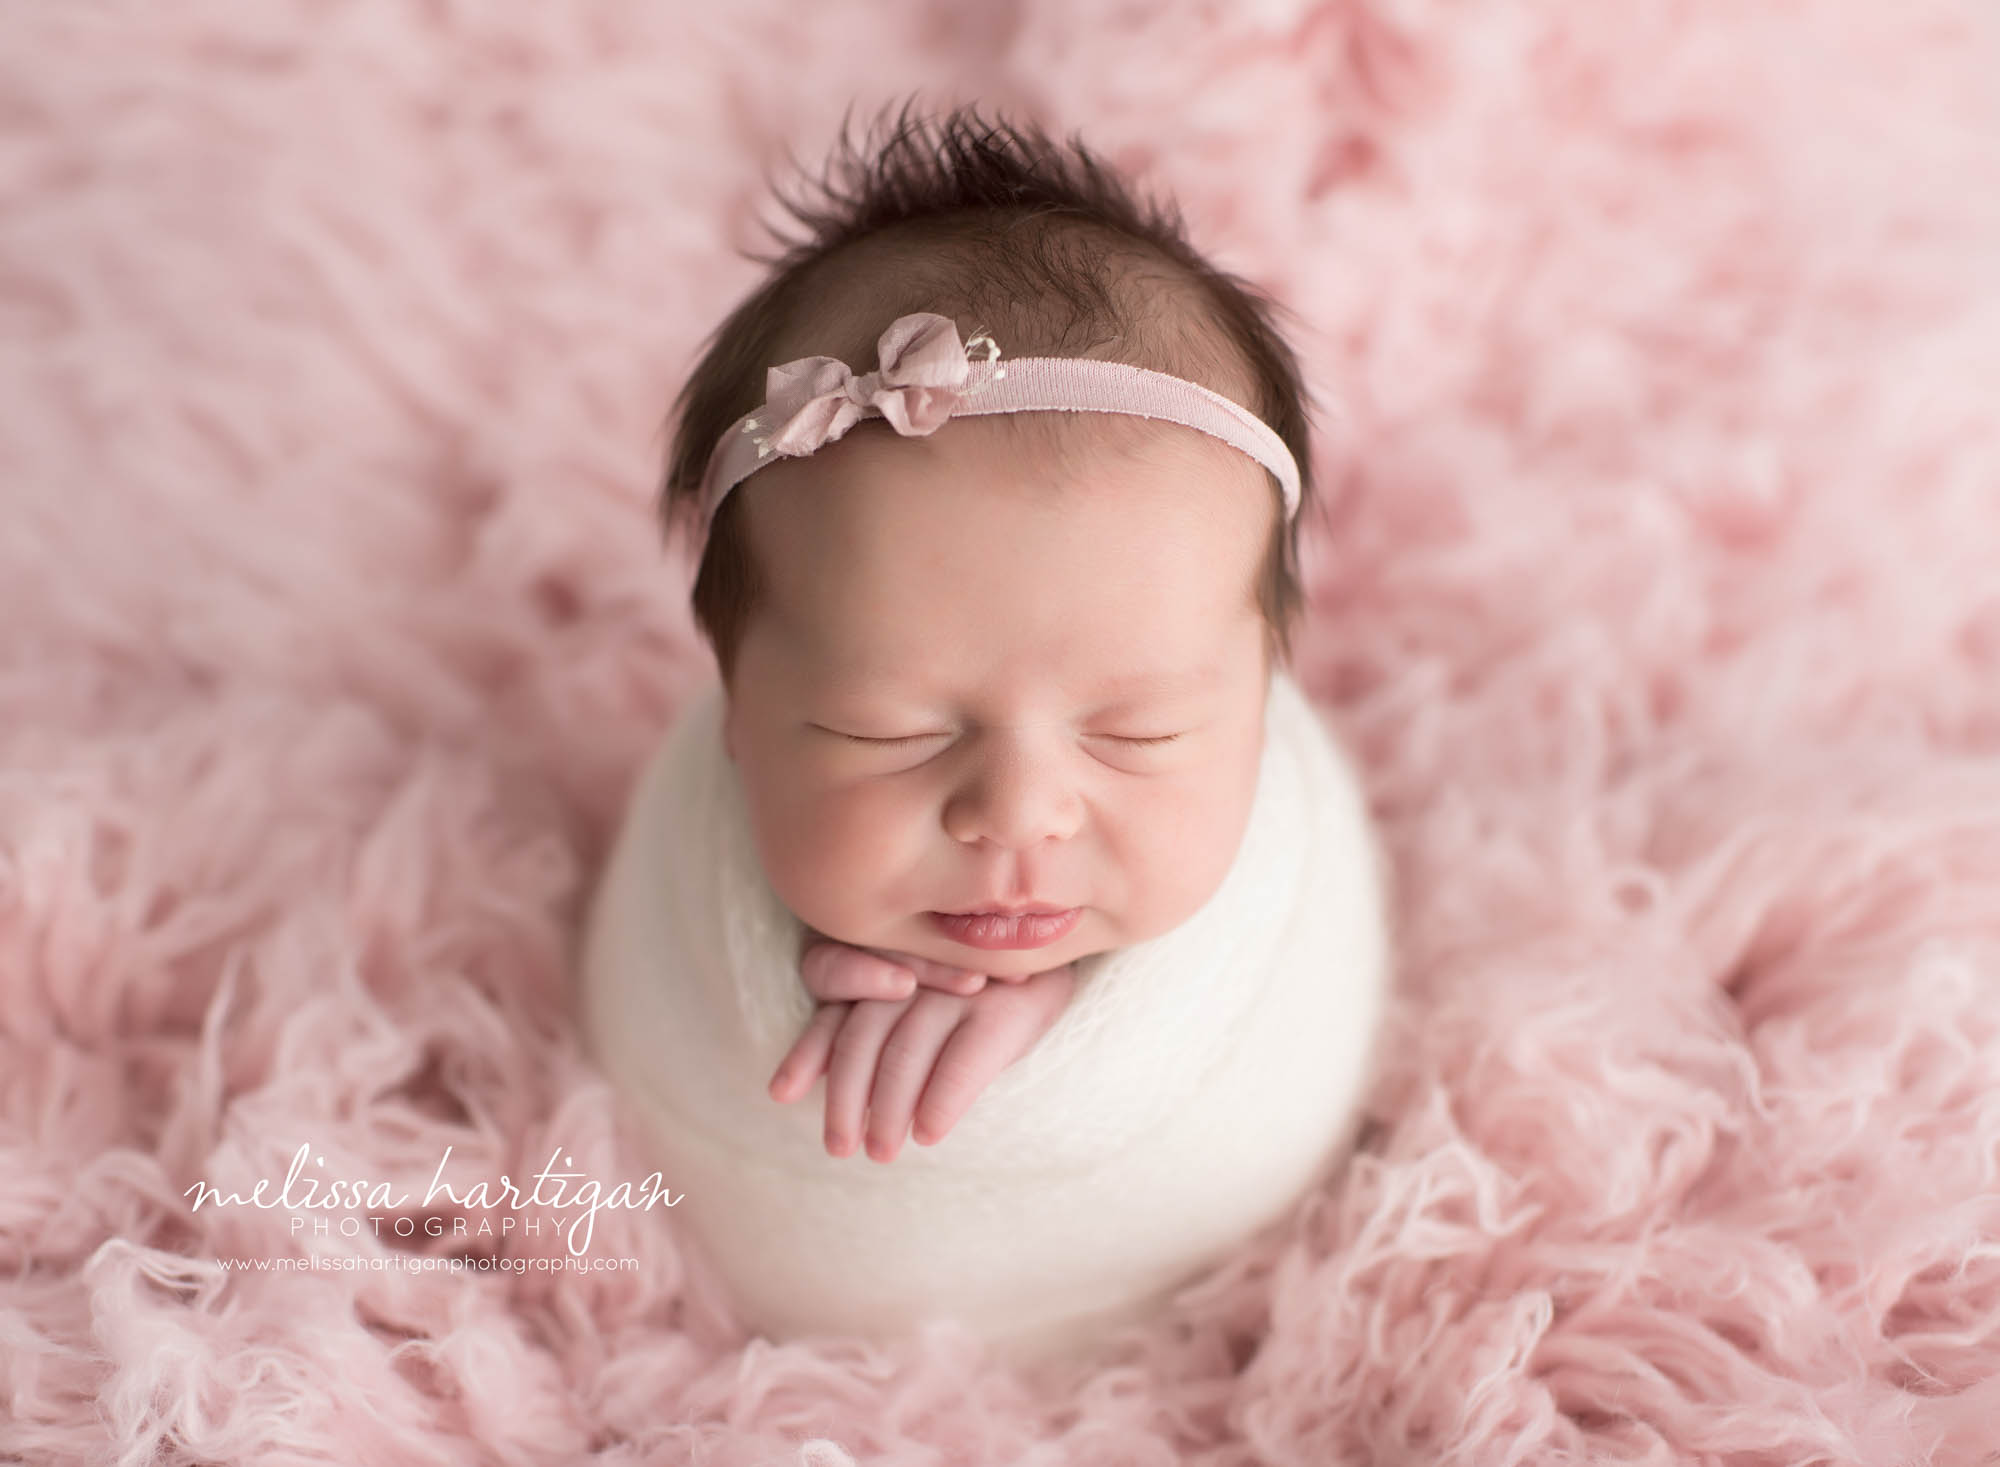 Melissa Hartigan Photography Connecticut Newborn Photographer Coventry Ct Middlefield CT baby Fairfield county Newborn and maternity photography Baby girl pink headband in pink wrap on pink flokati sleeping